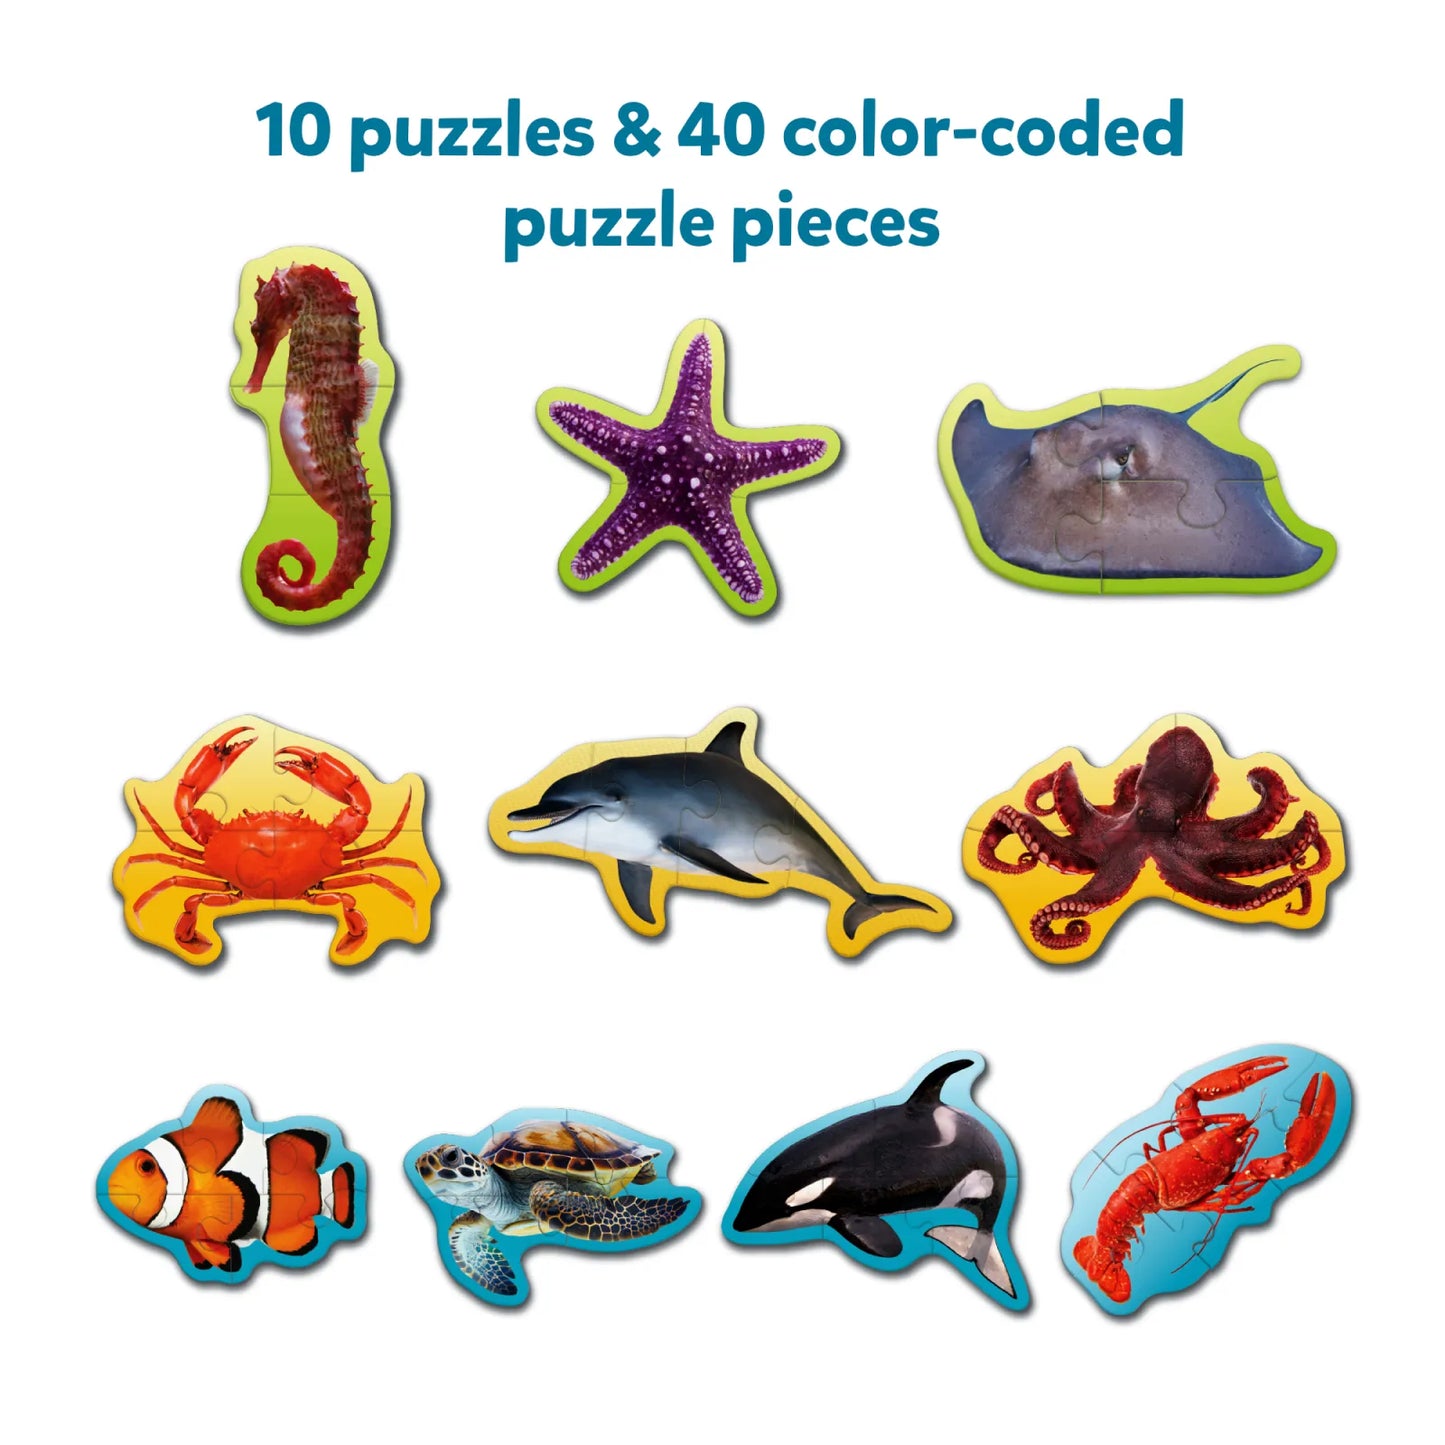 Step By Step Puzzle: Underwater Animals (ages 3+)